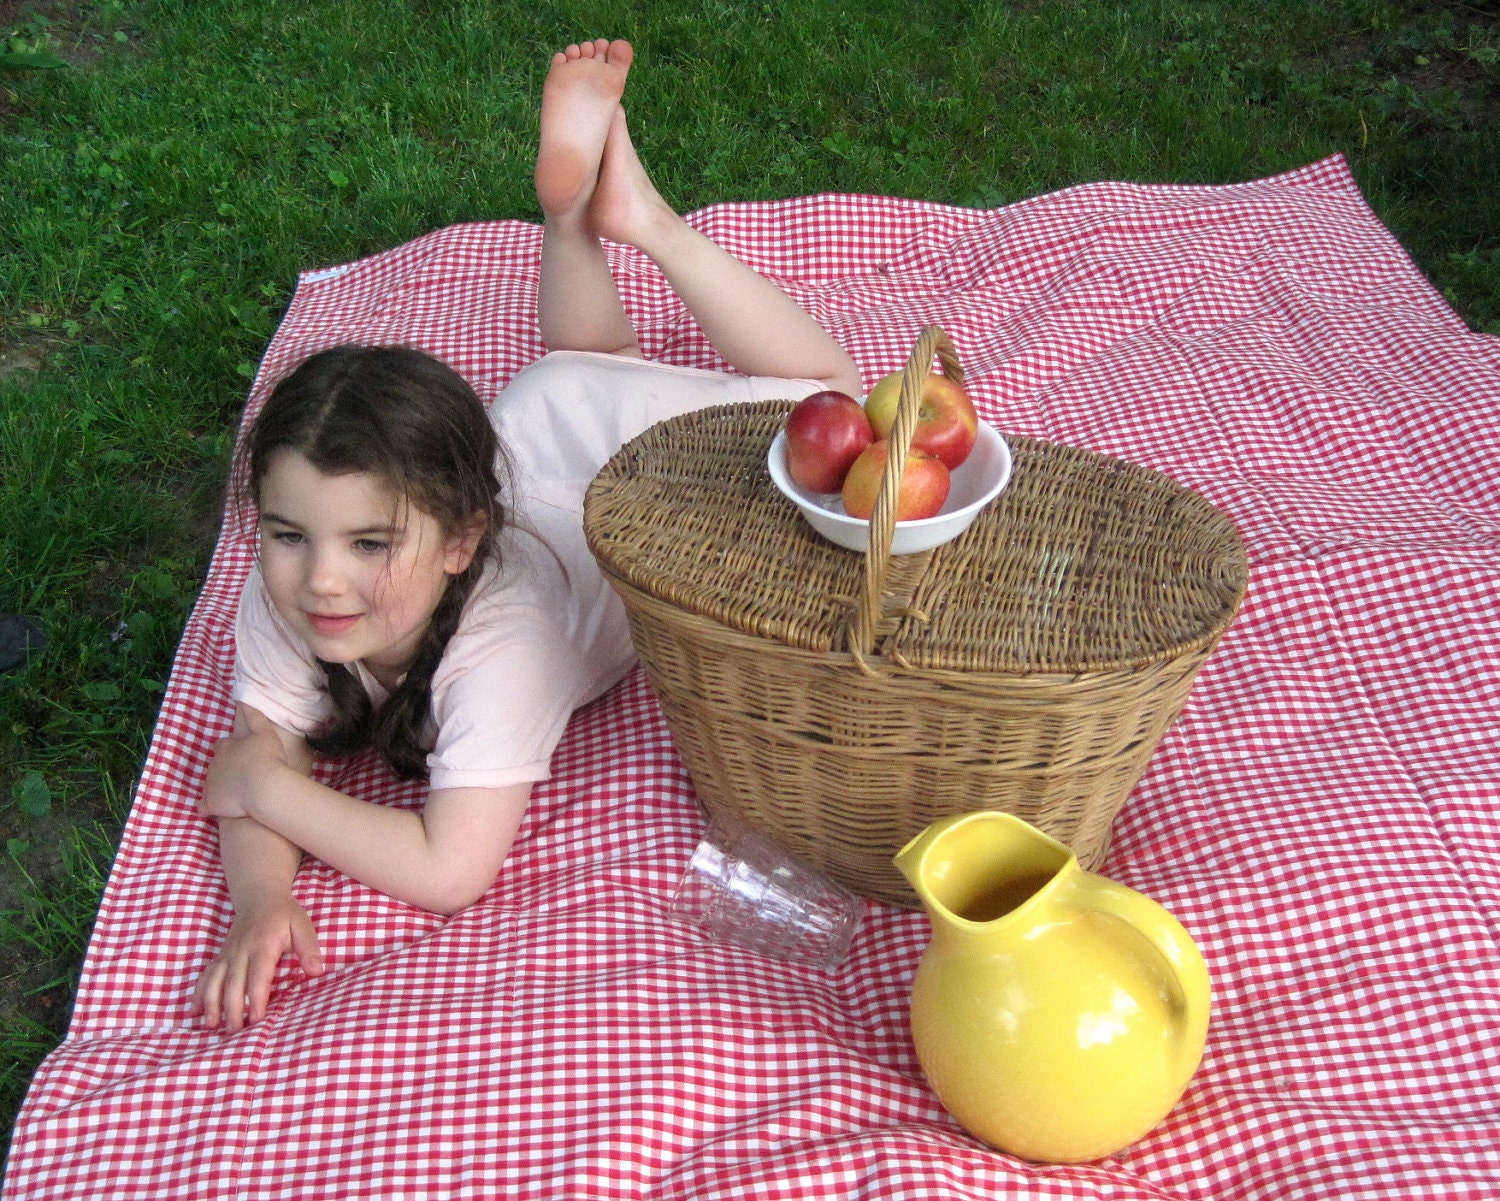 WATERPROOF Picnic Blanket Non-Toxic / Eco Friendly Retro Summer Beach Blanket in Red Gingham (Ready to Ship) - SewnNatural